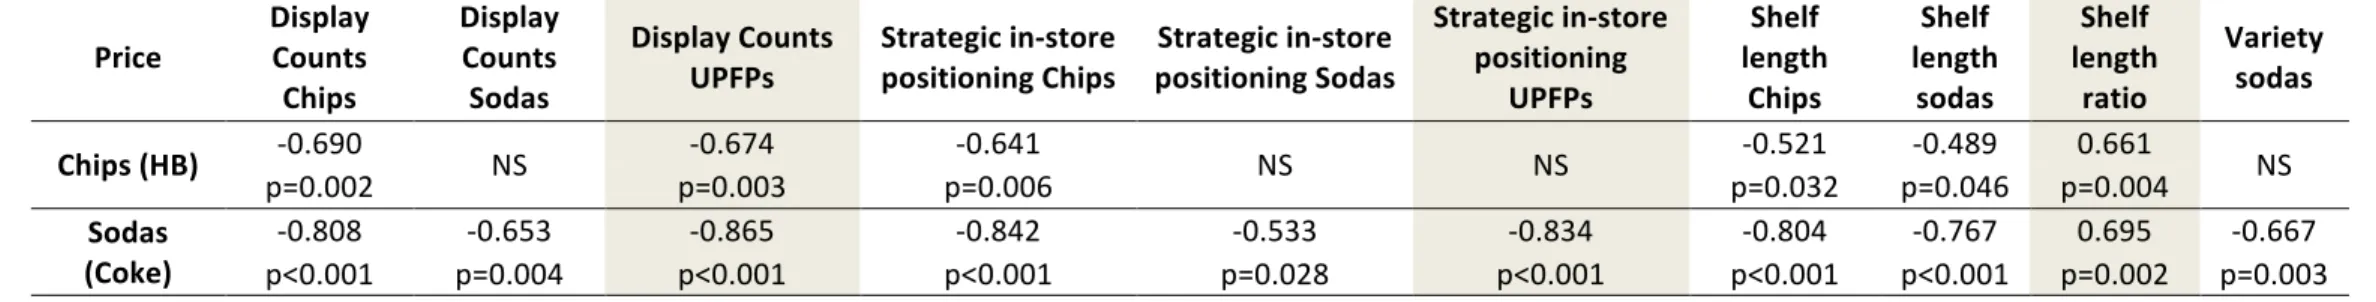 Table	3:	Spearman	Correlations	between	Prominence	Indicators	and	Price	of	Ultra-Processed	Food	Products		 	 	 	